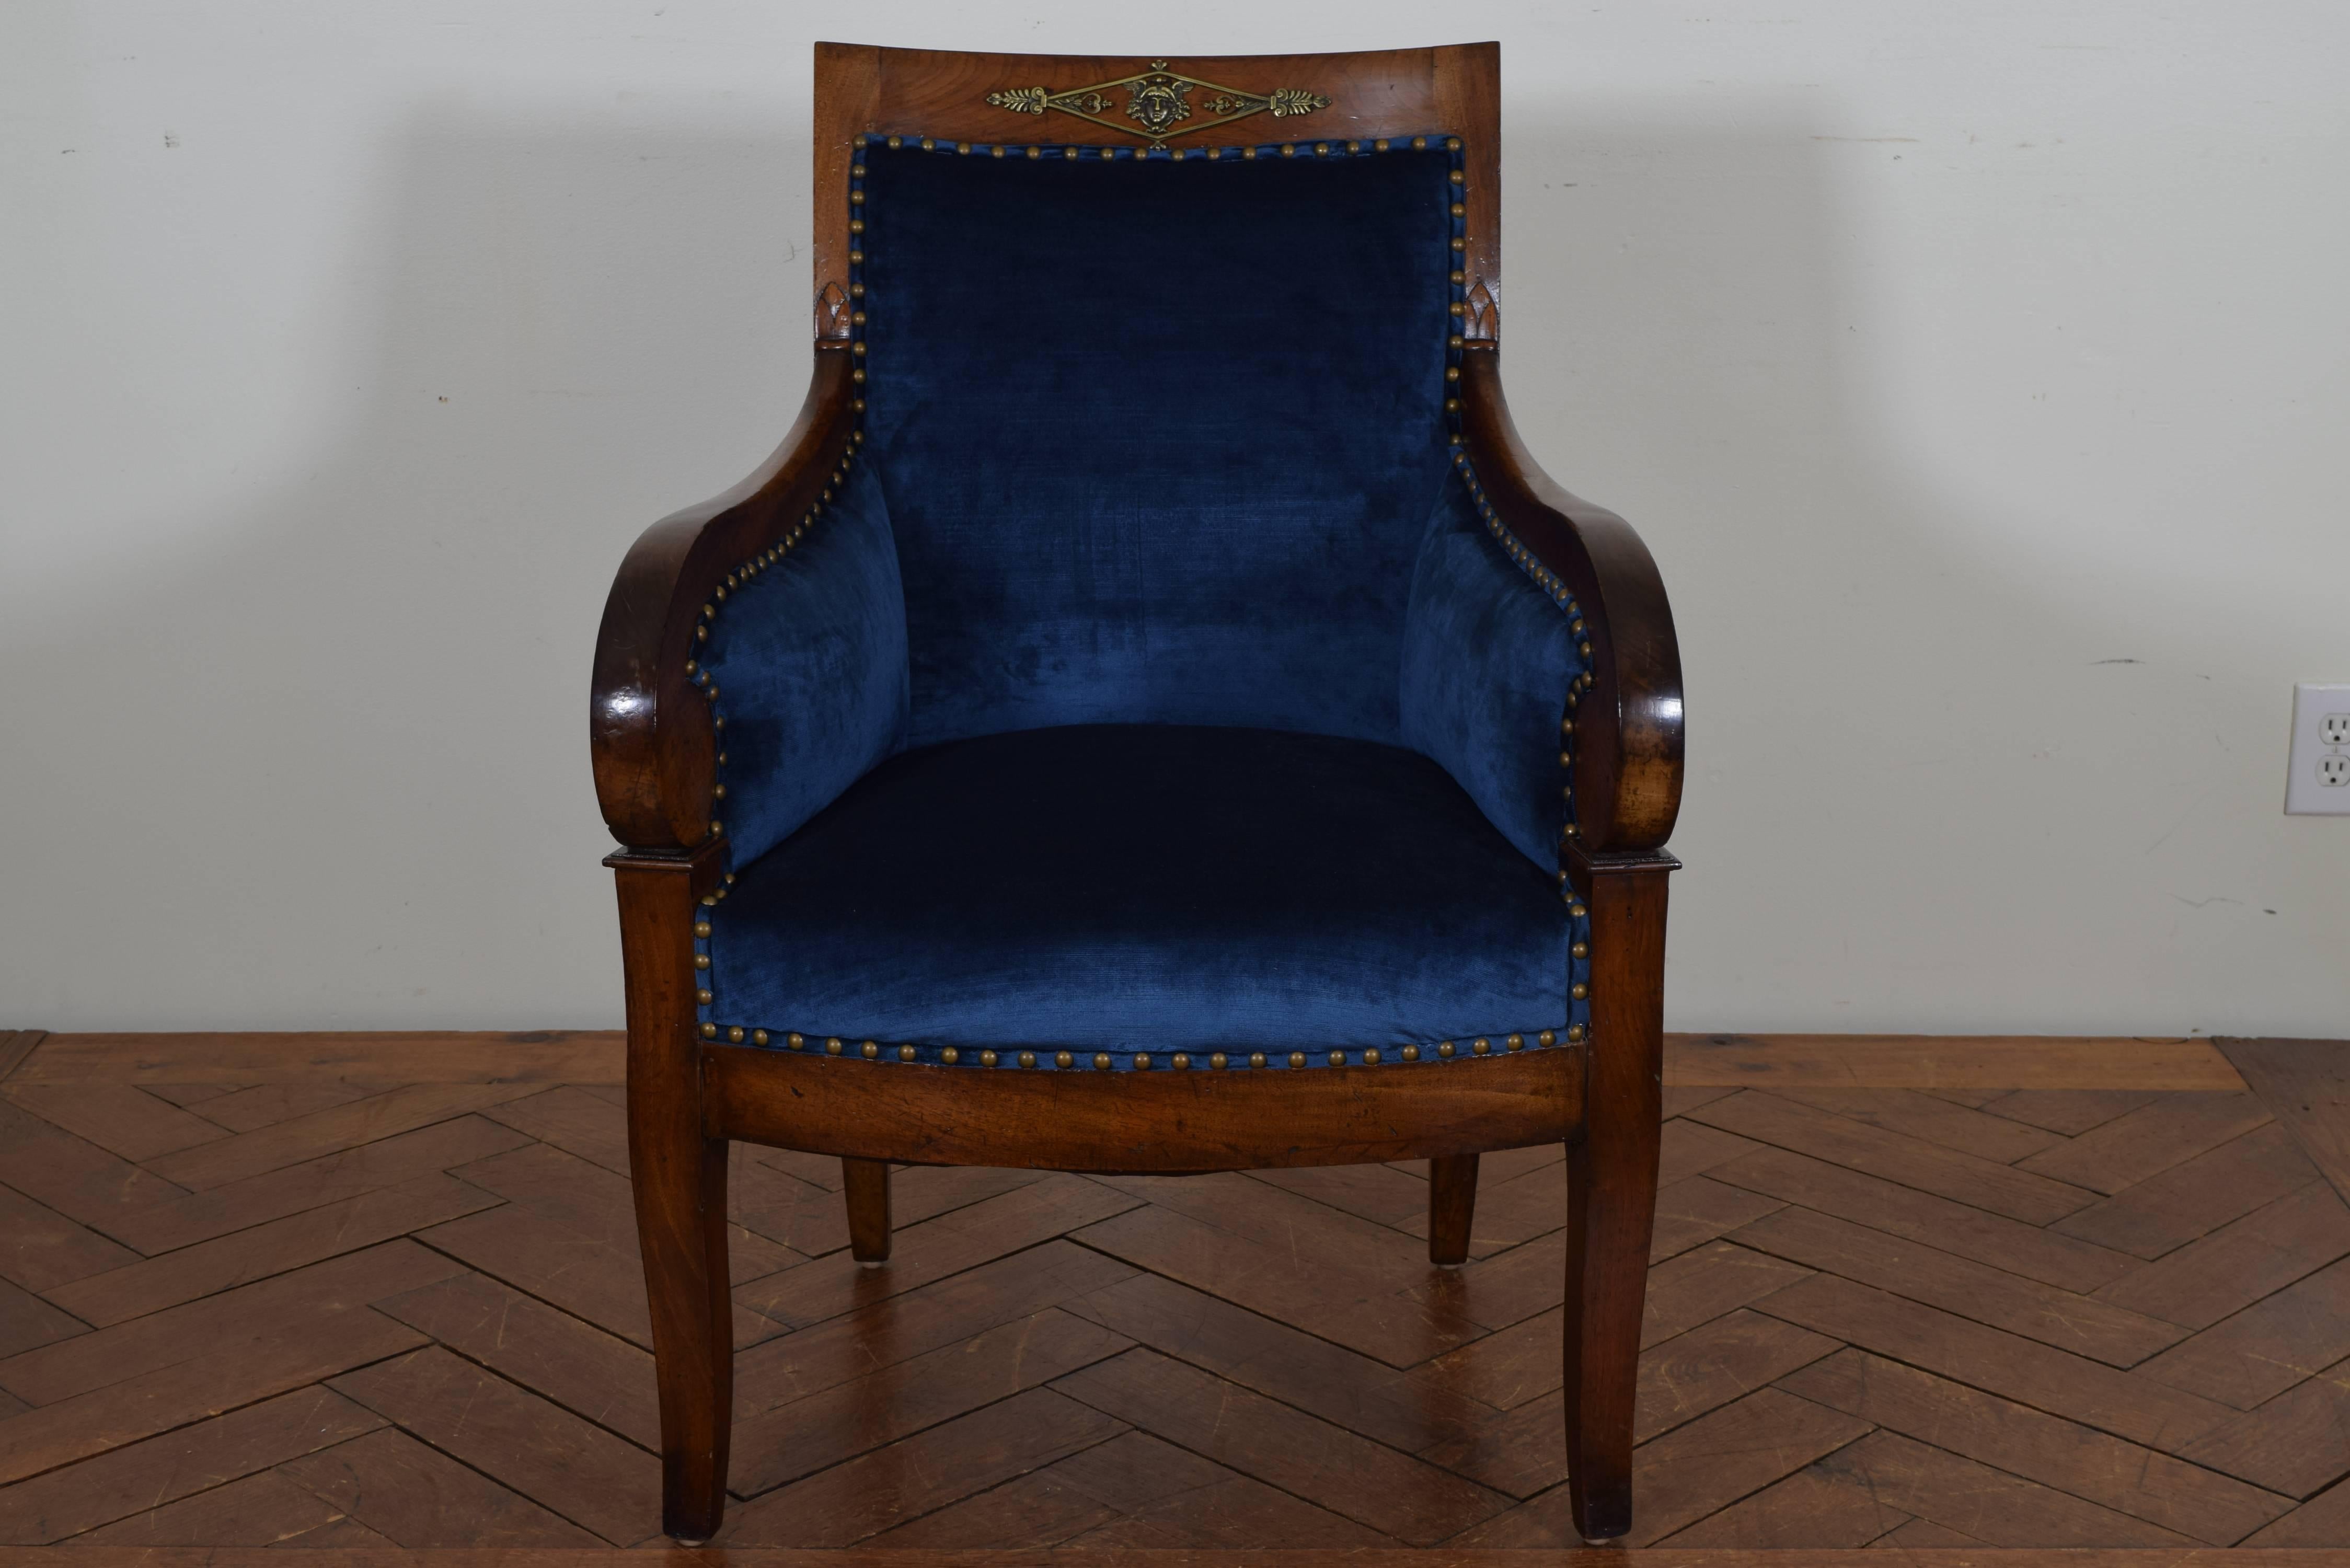 French restauration period walnut and upholstered bergere, late first quarter of the 19th century, having a curved backrest with slight carvings at sides and a bronze-mounted decorative mask of mercury at upper section, the graceful arms extending